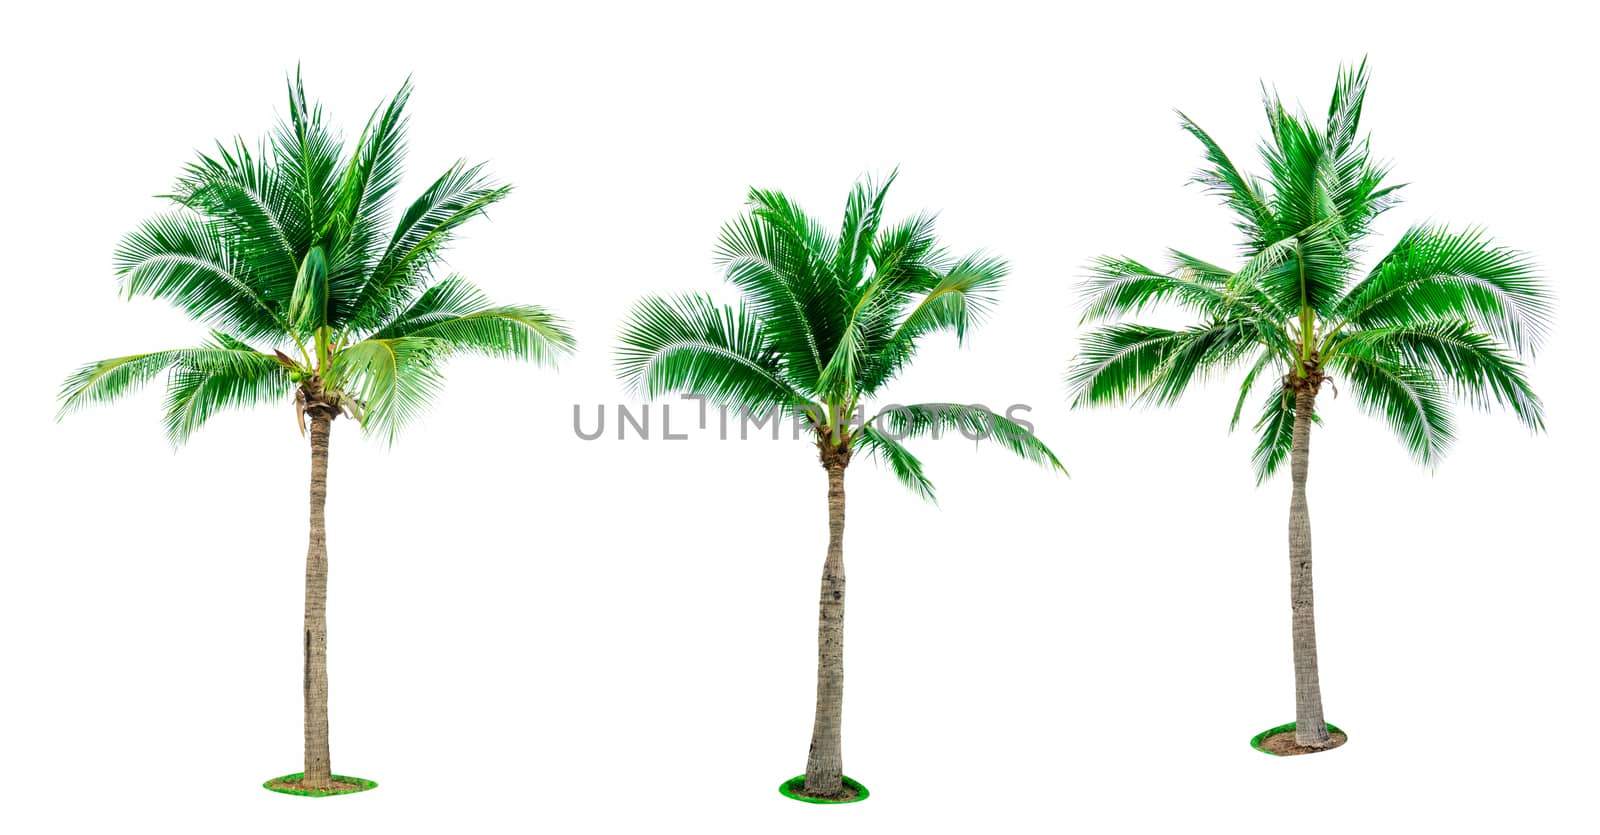 Set of coconut tree isolated on white background used for advertising decorative architecture. Summer and beach concept. Tropical palm tree. by Fahroni